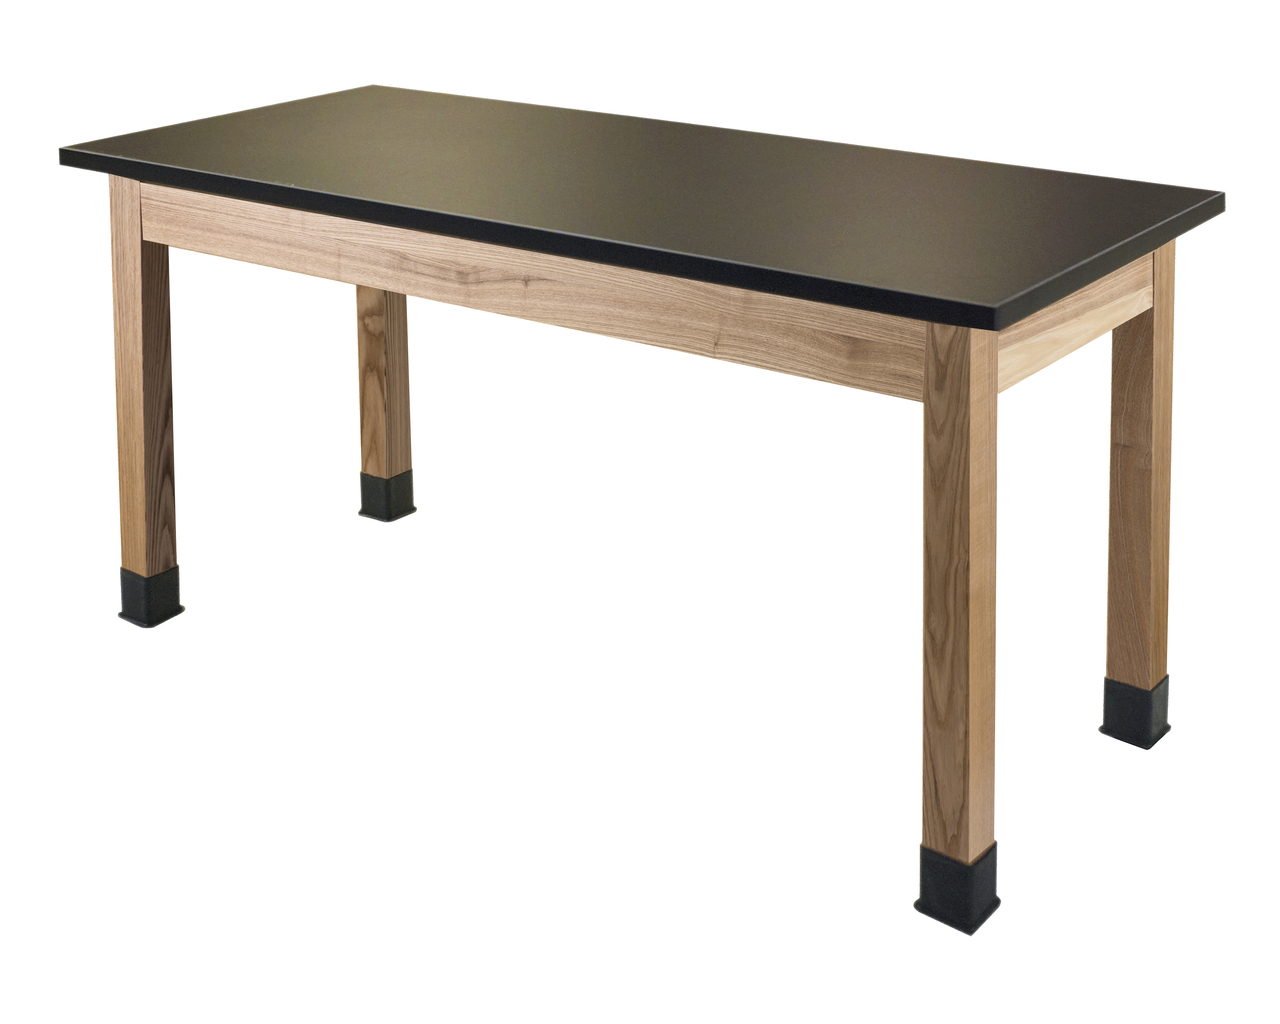 NPS Wood Science Lab Table -  24"x60"x36" -  Epoxy Top - Black Top and Ash Leg